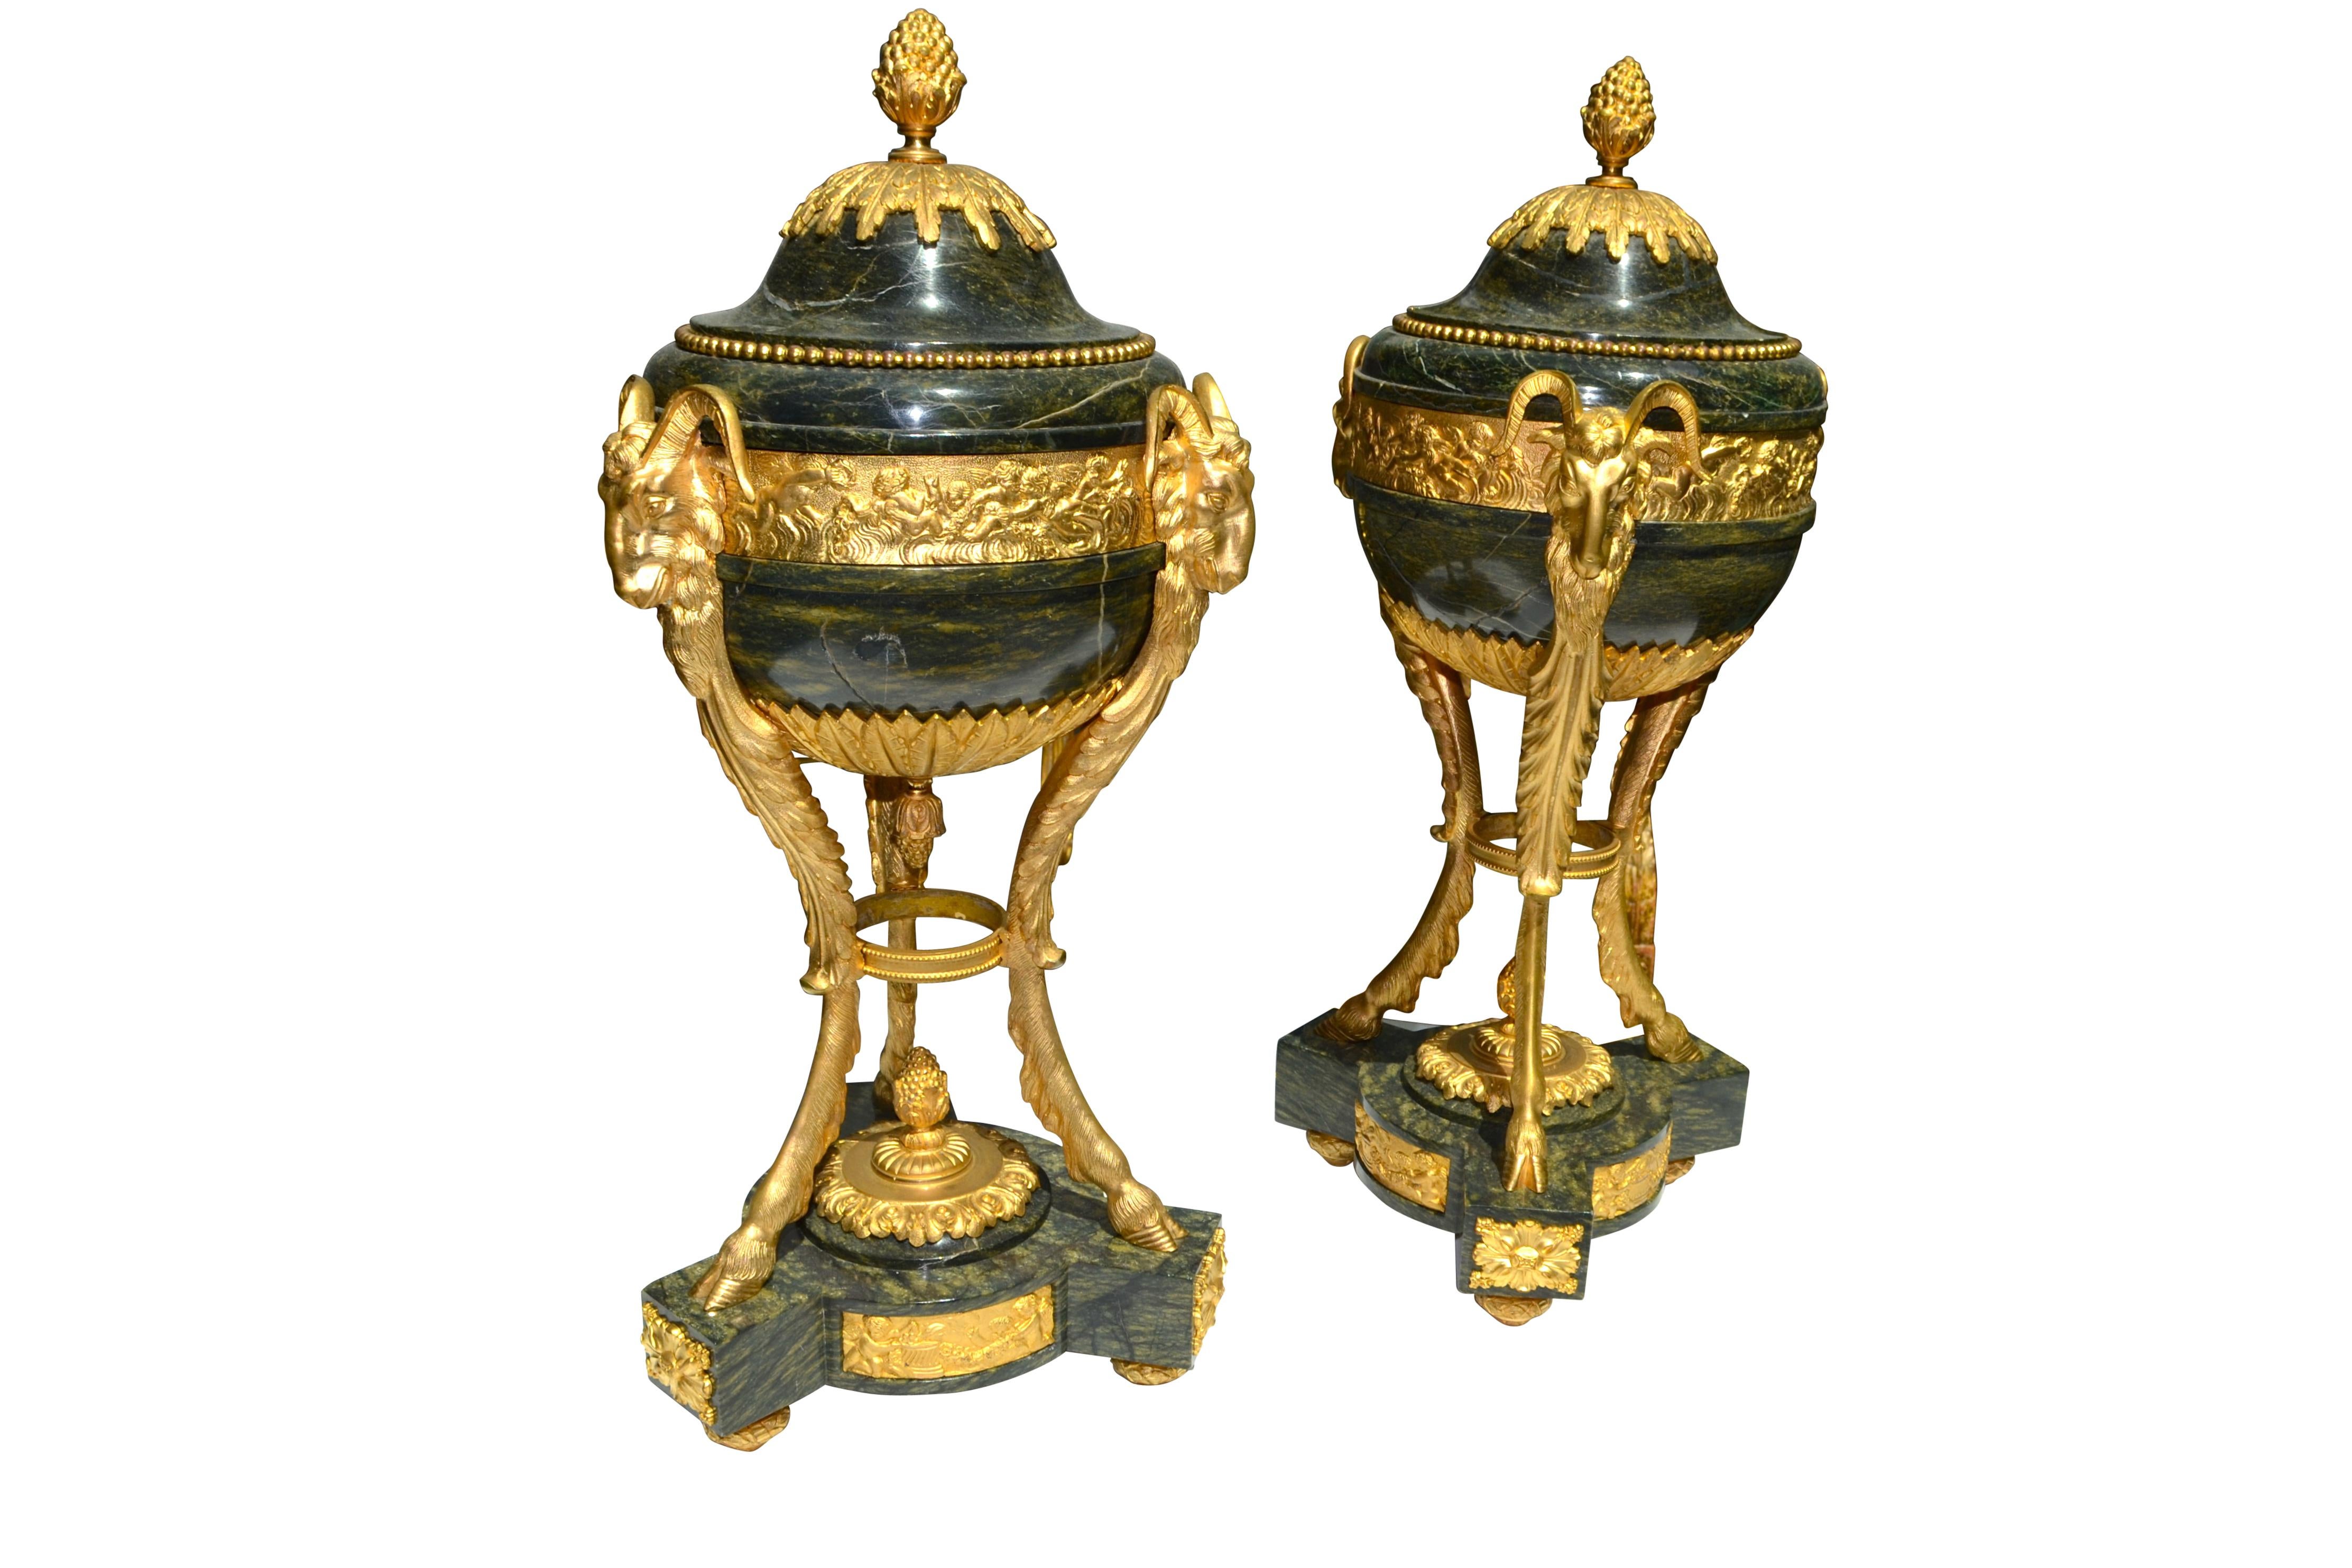 A pair of lidded urns in the Louis XVI style, the bronzes very much in the manner of the famous French sculptor Gouthiere. The tri-form base richly decorated with gilt bronze trim supports three 'legs' each terminating in a goat's head, which in